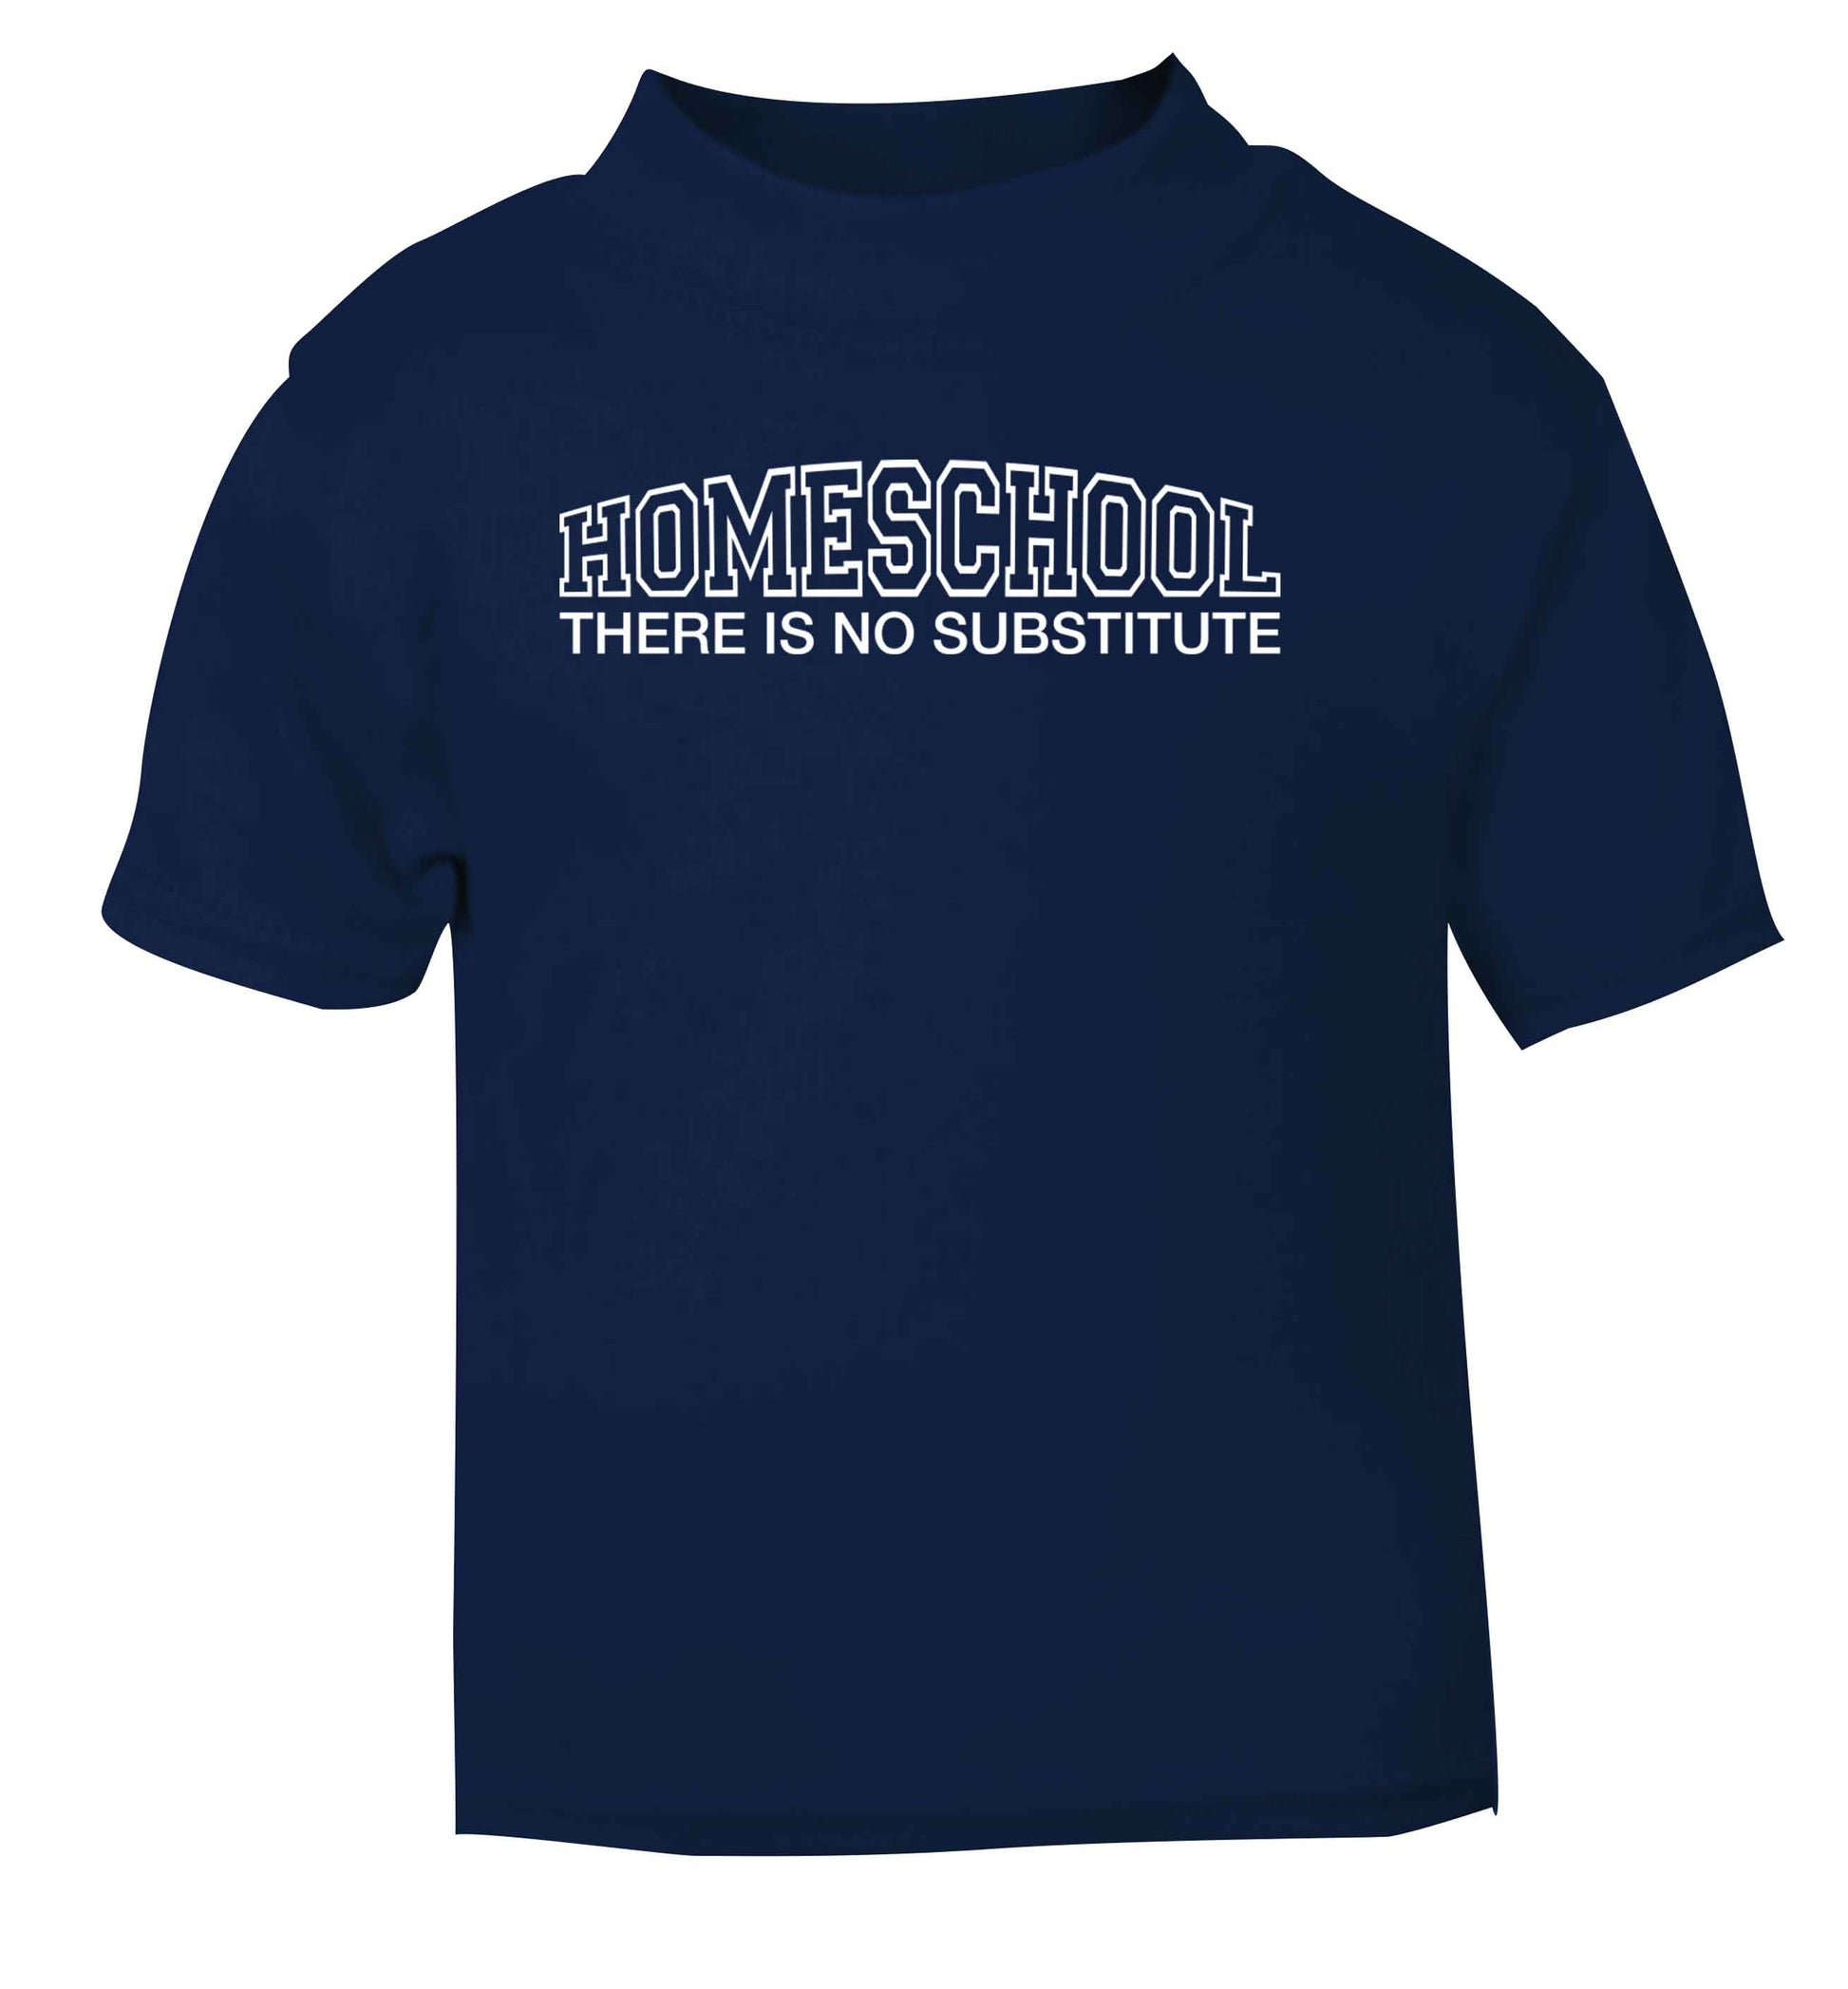 Homeschool there is not substitute navy Baby Toddler Tshirt 2 Years